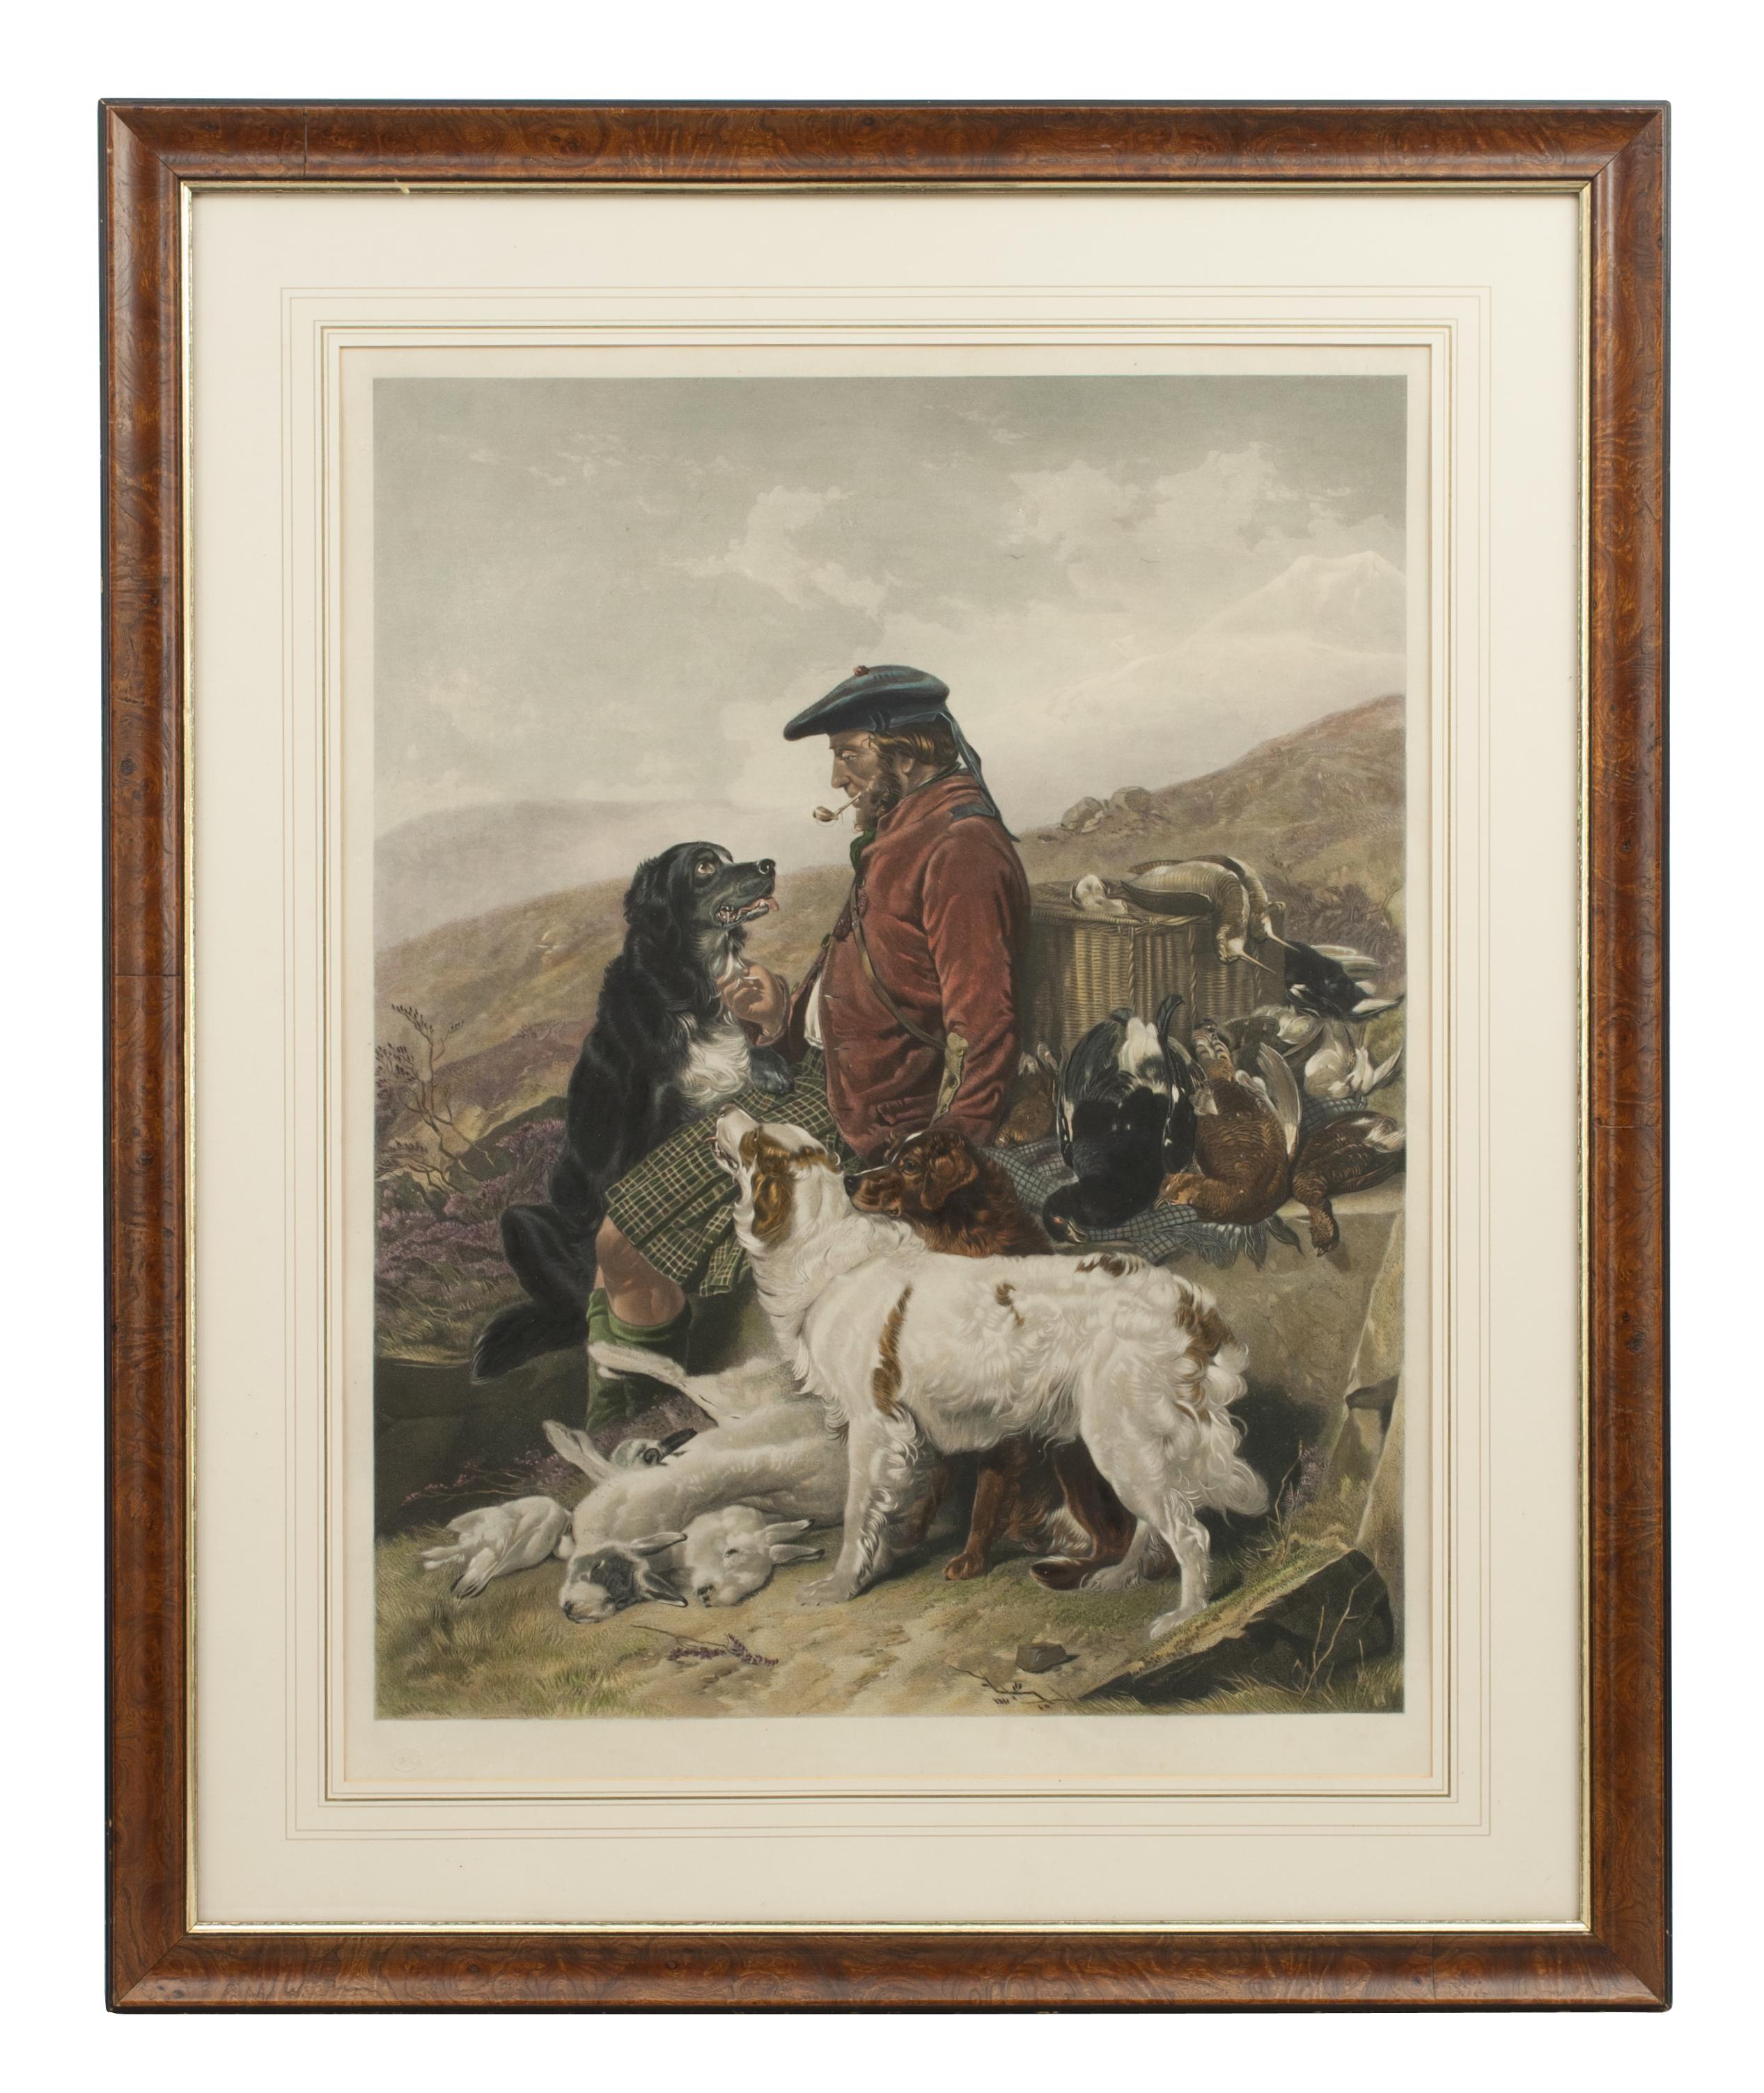 English and Scottish Gamekeepers.
A large pair of mixed method colored engravings of an English and Scottish Gamekeeper, after the original paintings by Richard Ansdell. Both shooting engravings by F. Stackpoole and titled:- English Gamekeeper &